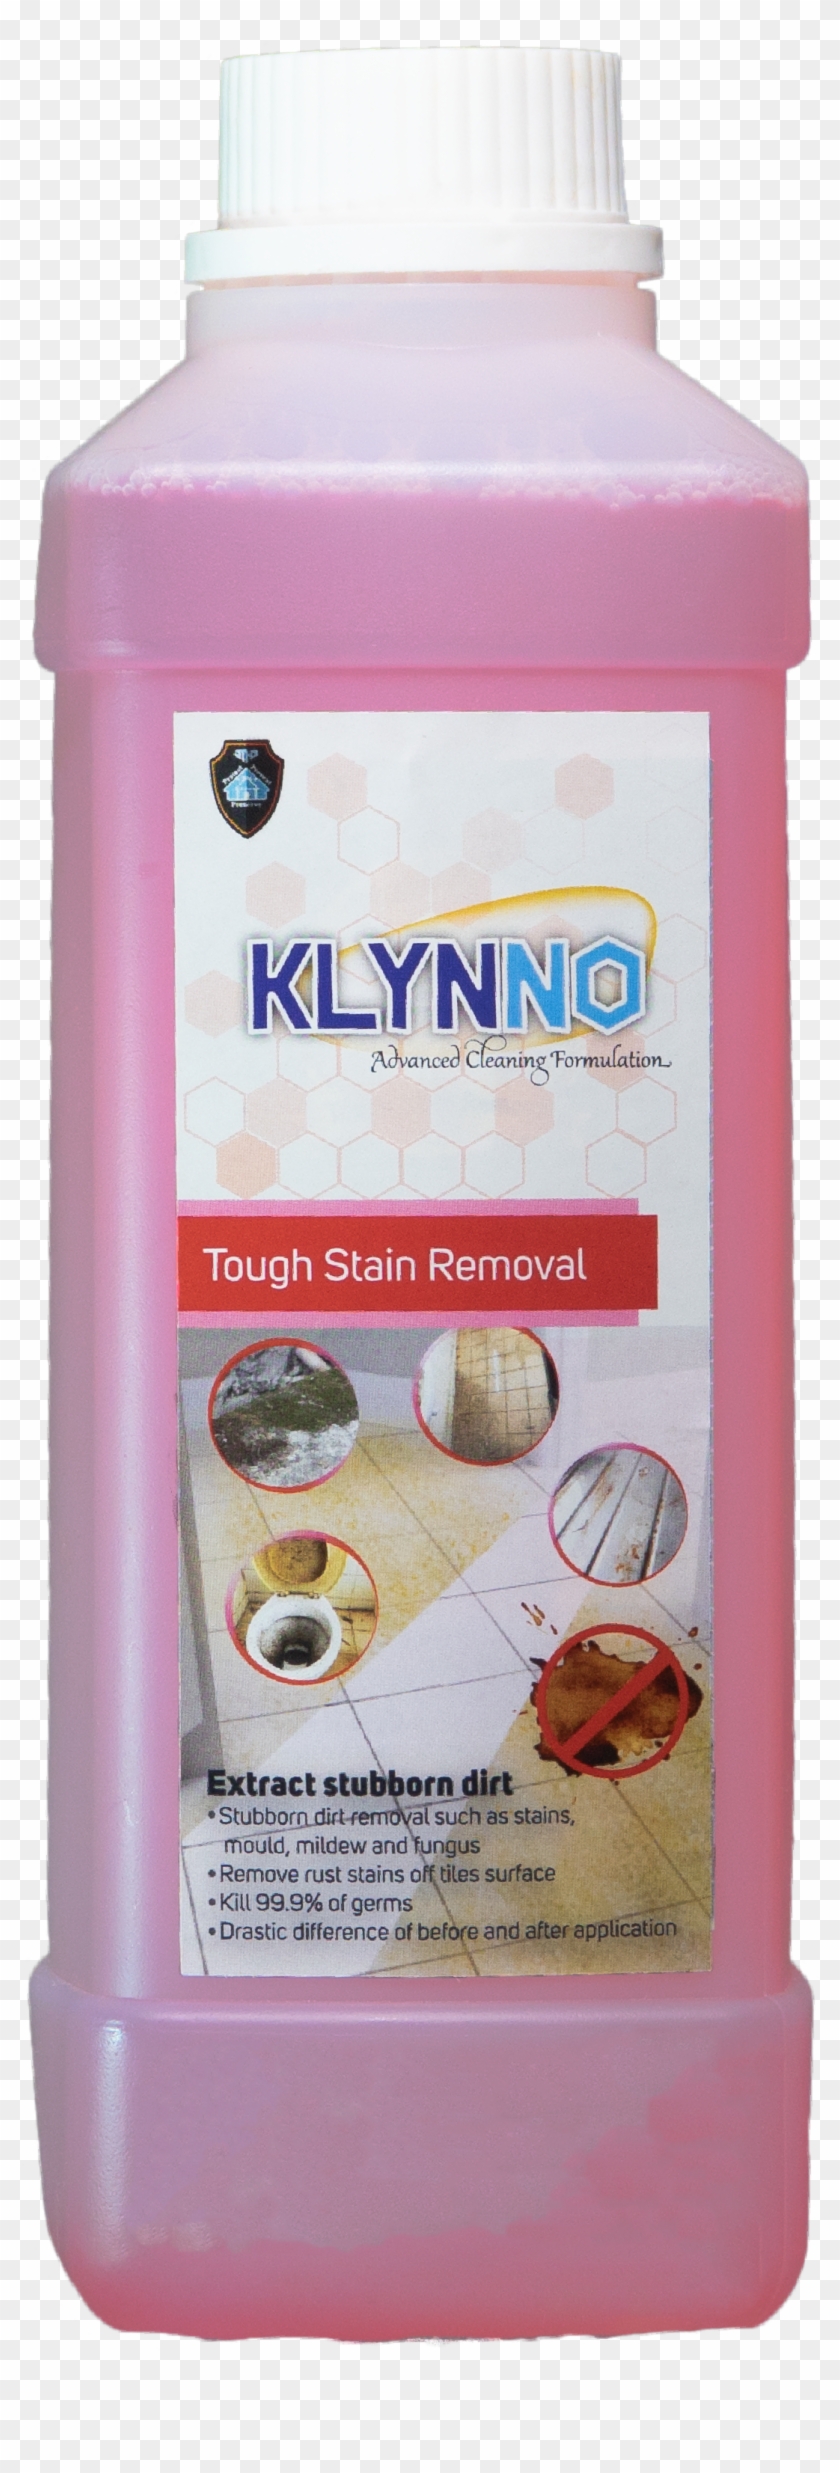 Tough Stain Removal Extract Stubborn Dirt - Plastic Bottle Clipart #5928316